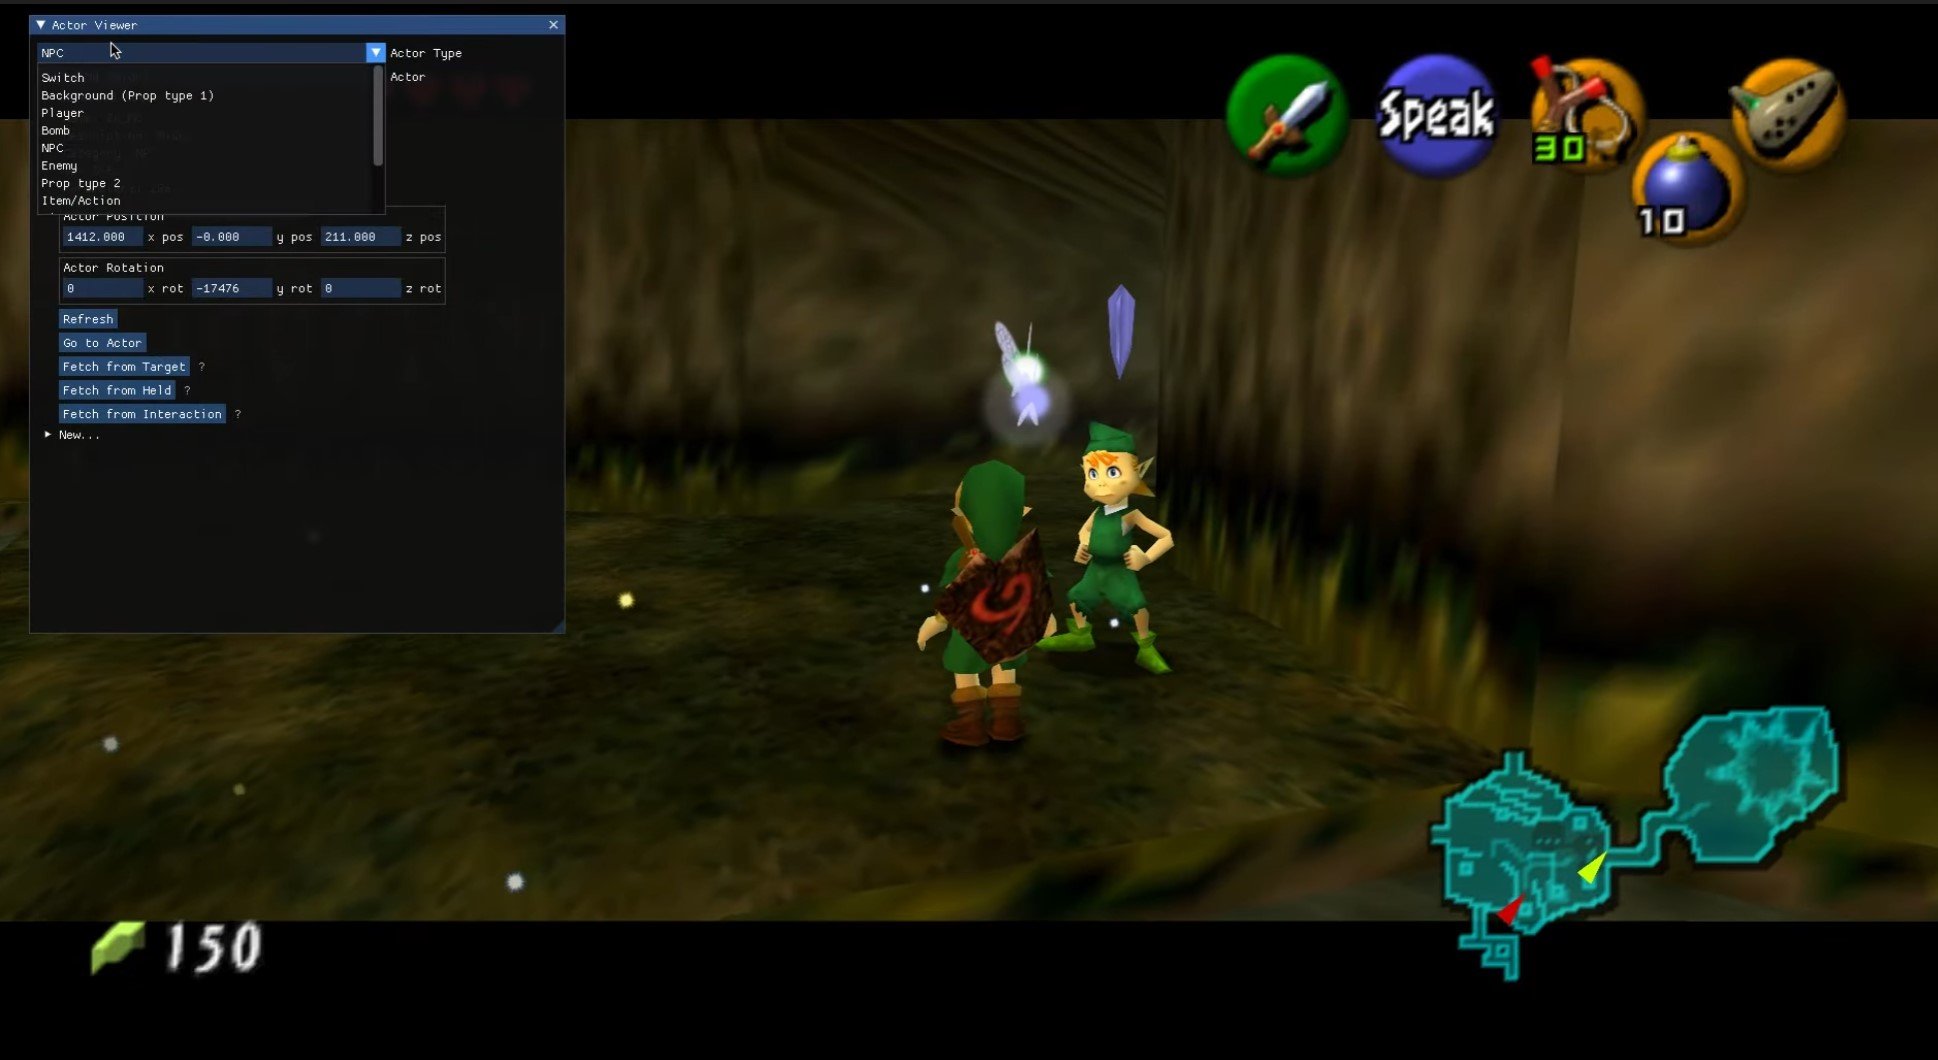 The Legend of Zelda Ocarina of Time PC Port, Open Ocarina, now supports  60fps